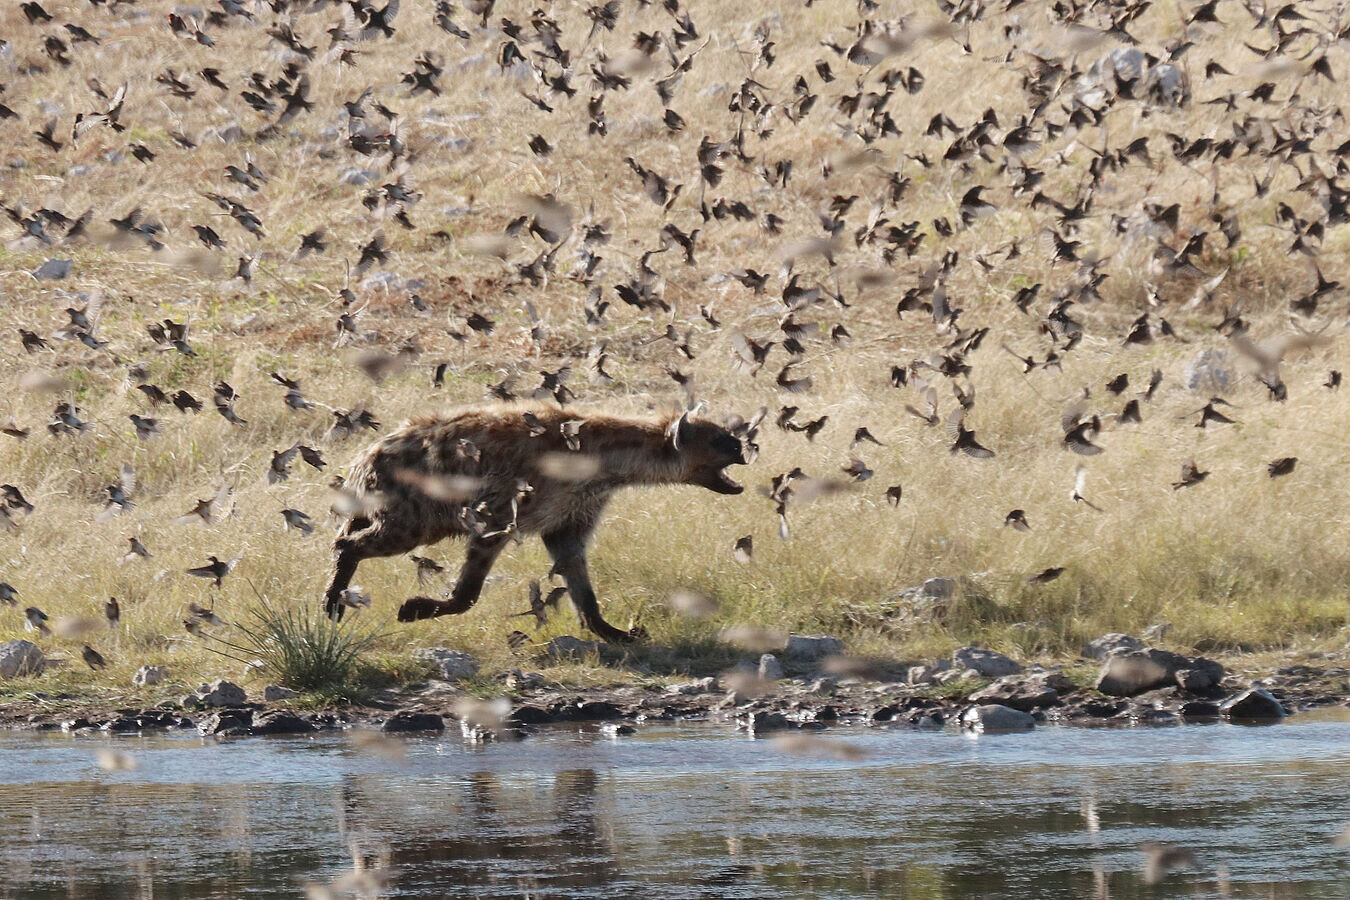 photo of Small birds spice up the already diverse diet of spotted hyenas in Namibia image